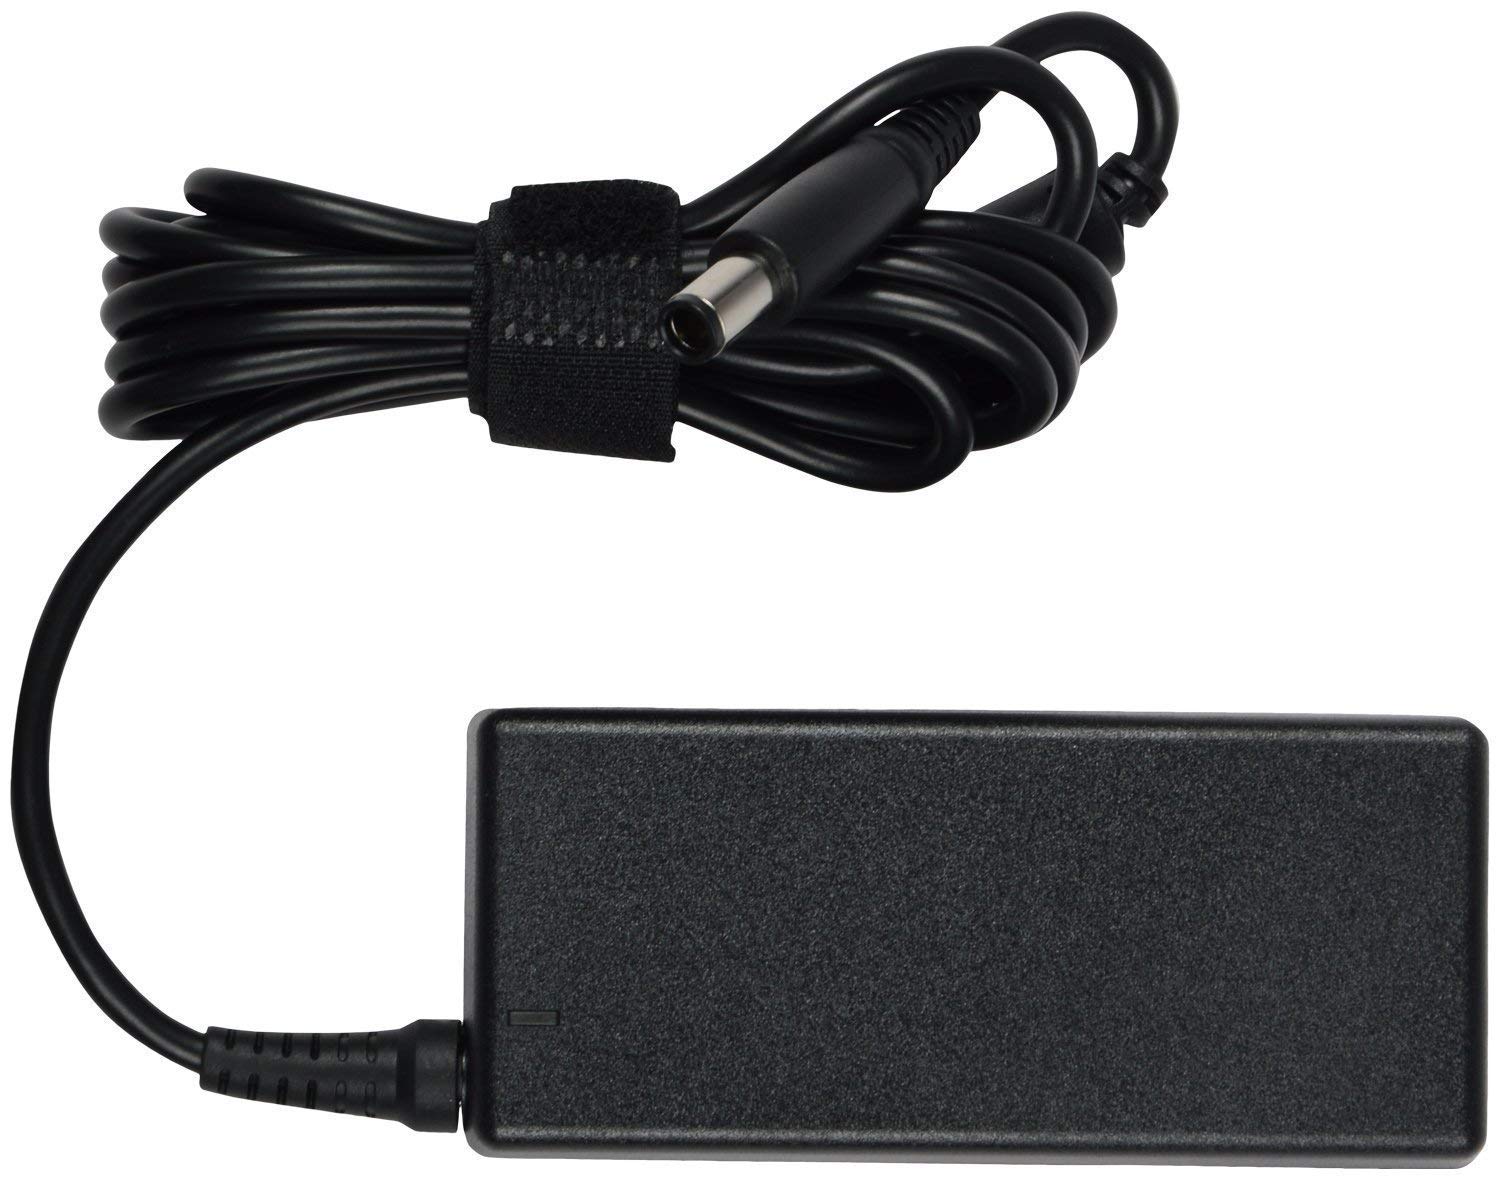 dell original 65w 19.5v adapter charger for inspiron 15 3521 inspiron 15r 5520 5537- Black